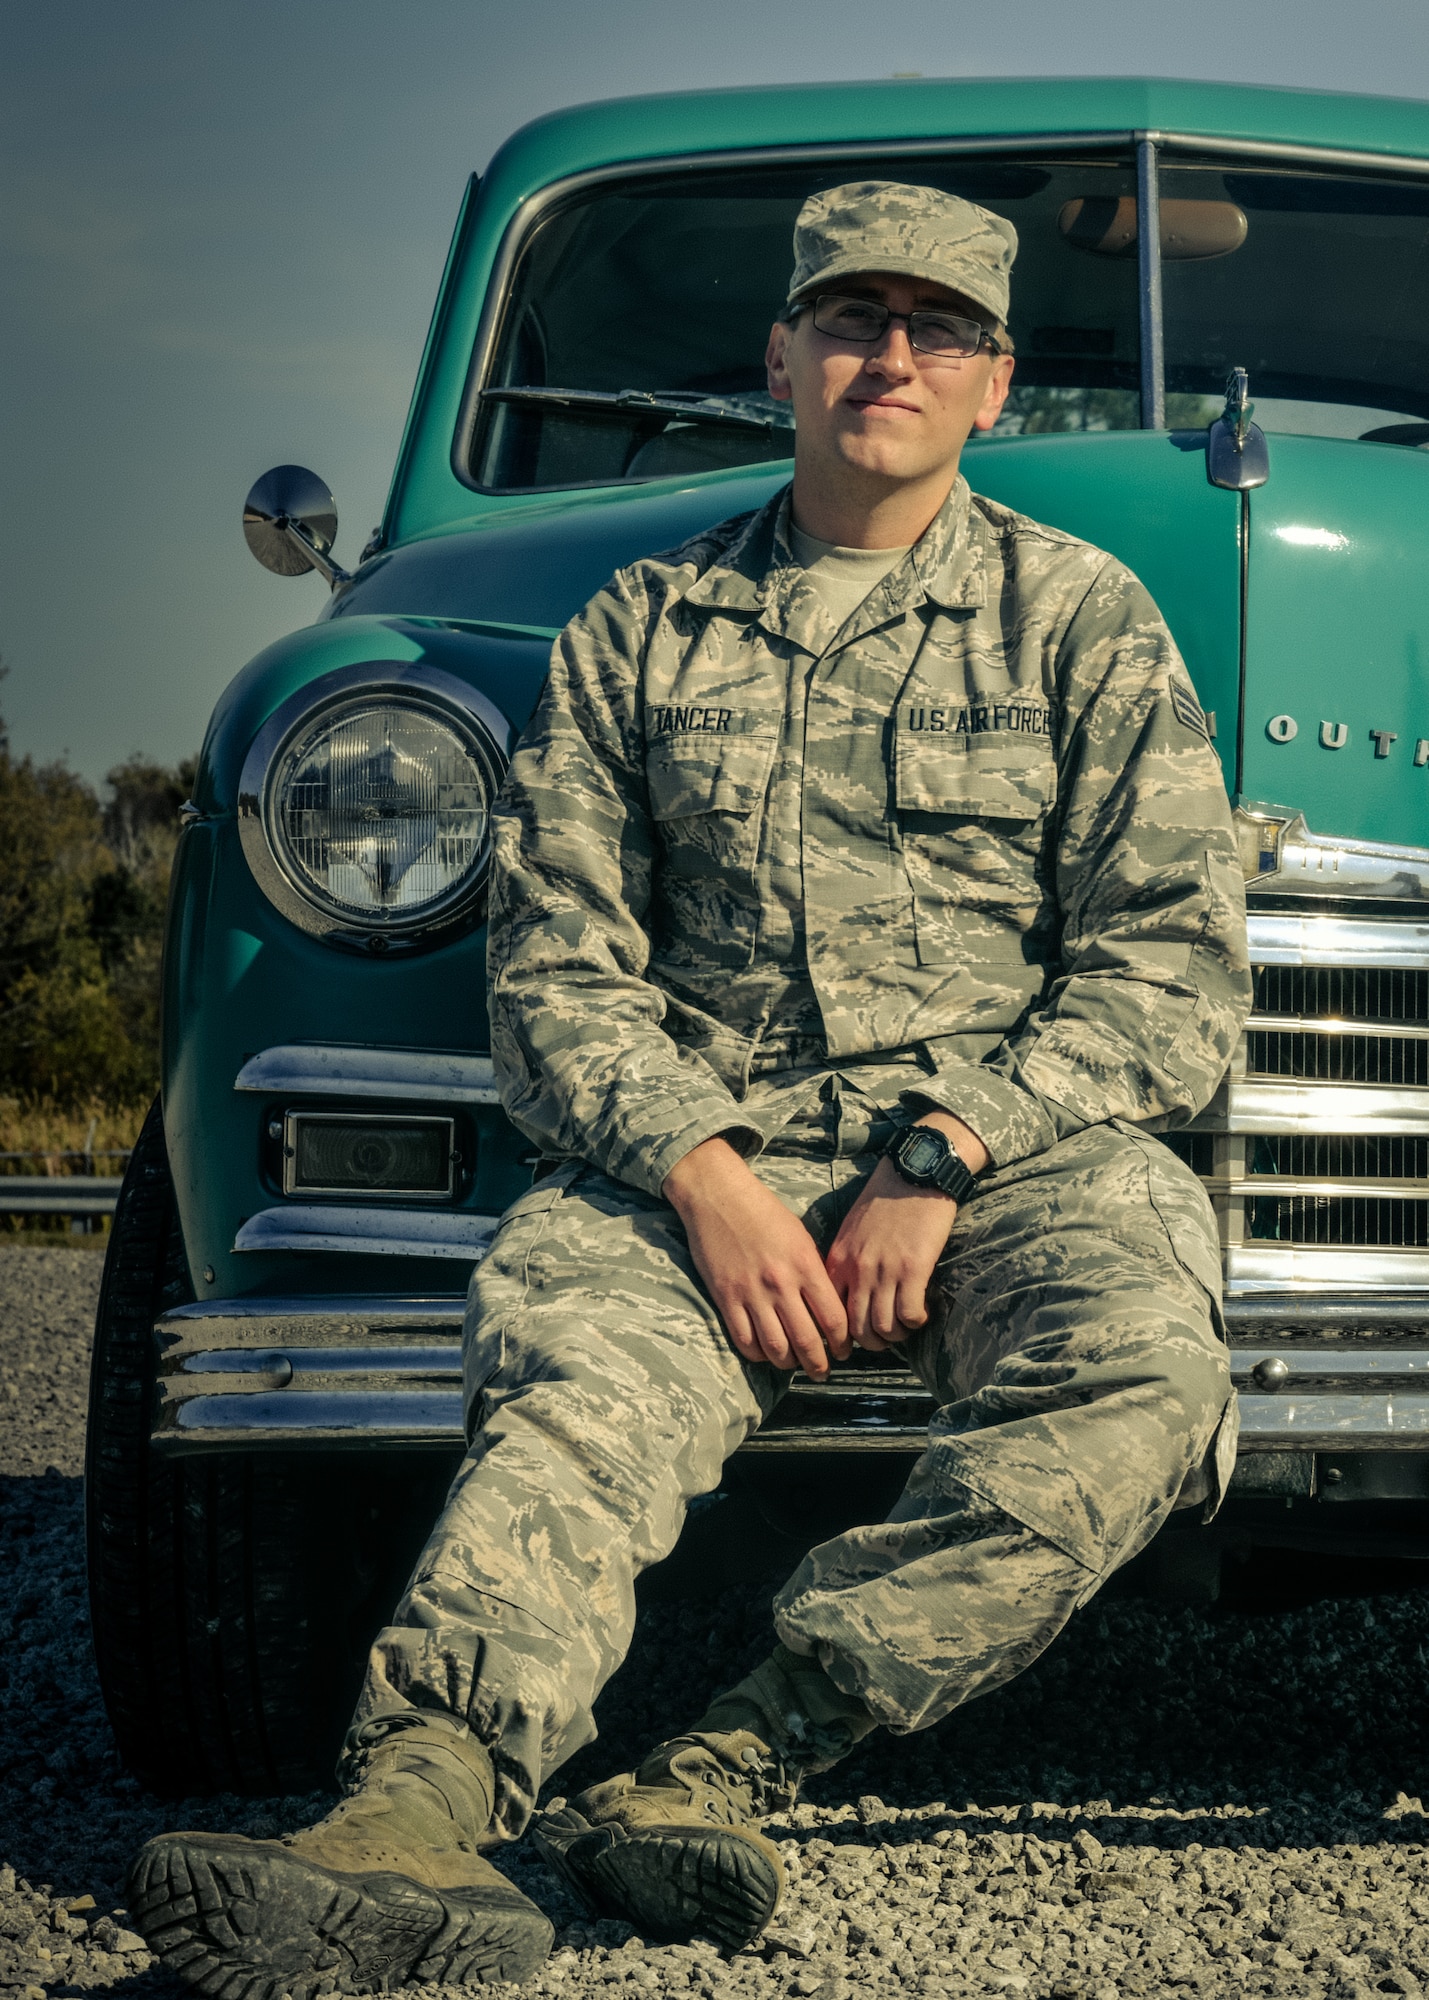 Senior Airman Noah Tancer, a public affairs specialist with the 910th Airlift Wing, sits on the front bumper of a 1949 Plymouth on October 15, 2019, at Youngstown Air Reserve Station. Tancer along with a handful of family members spent over three years restoring the car after Tancer purchased it for $1,000 upon graduating from high school.